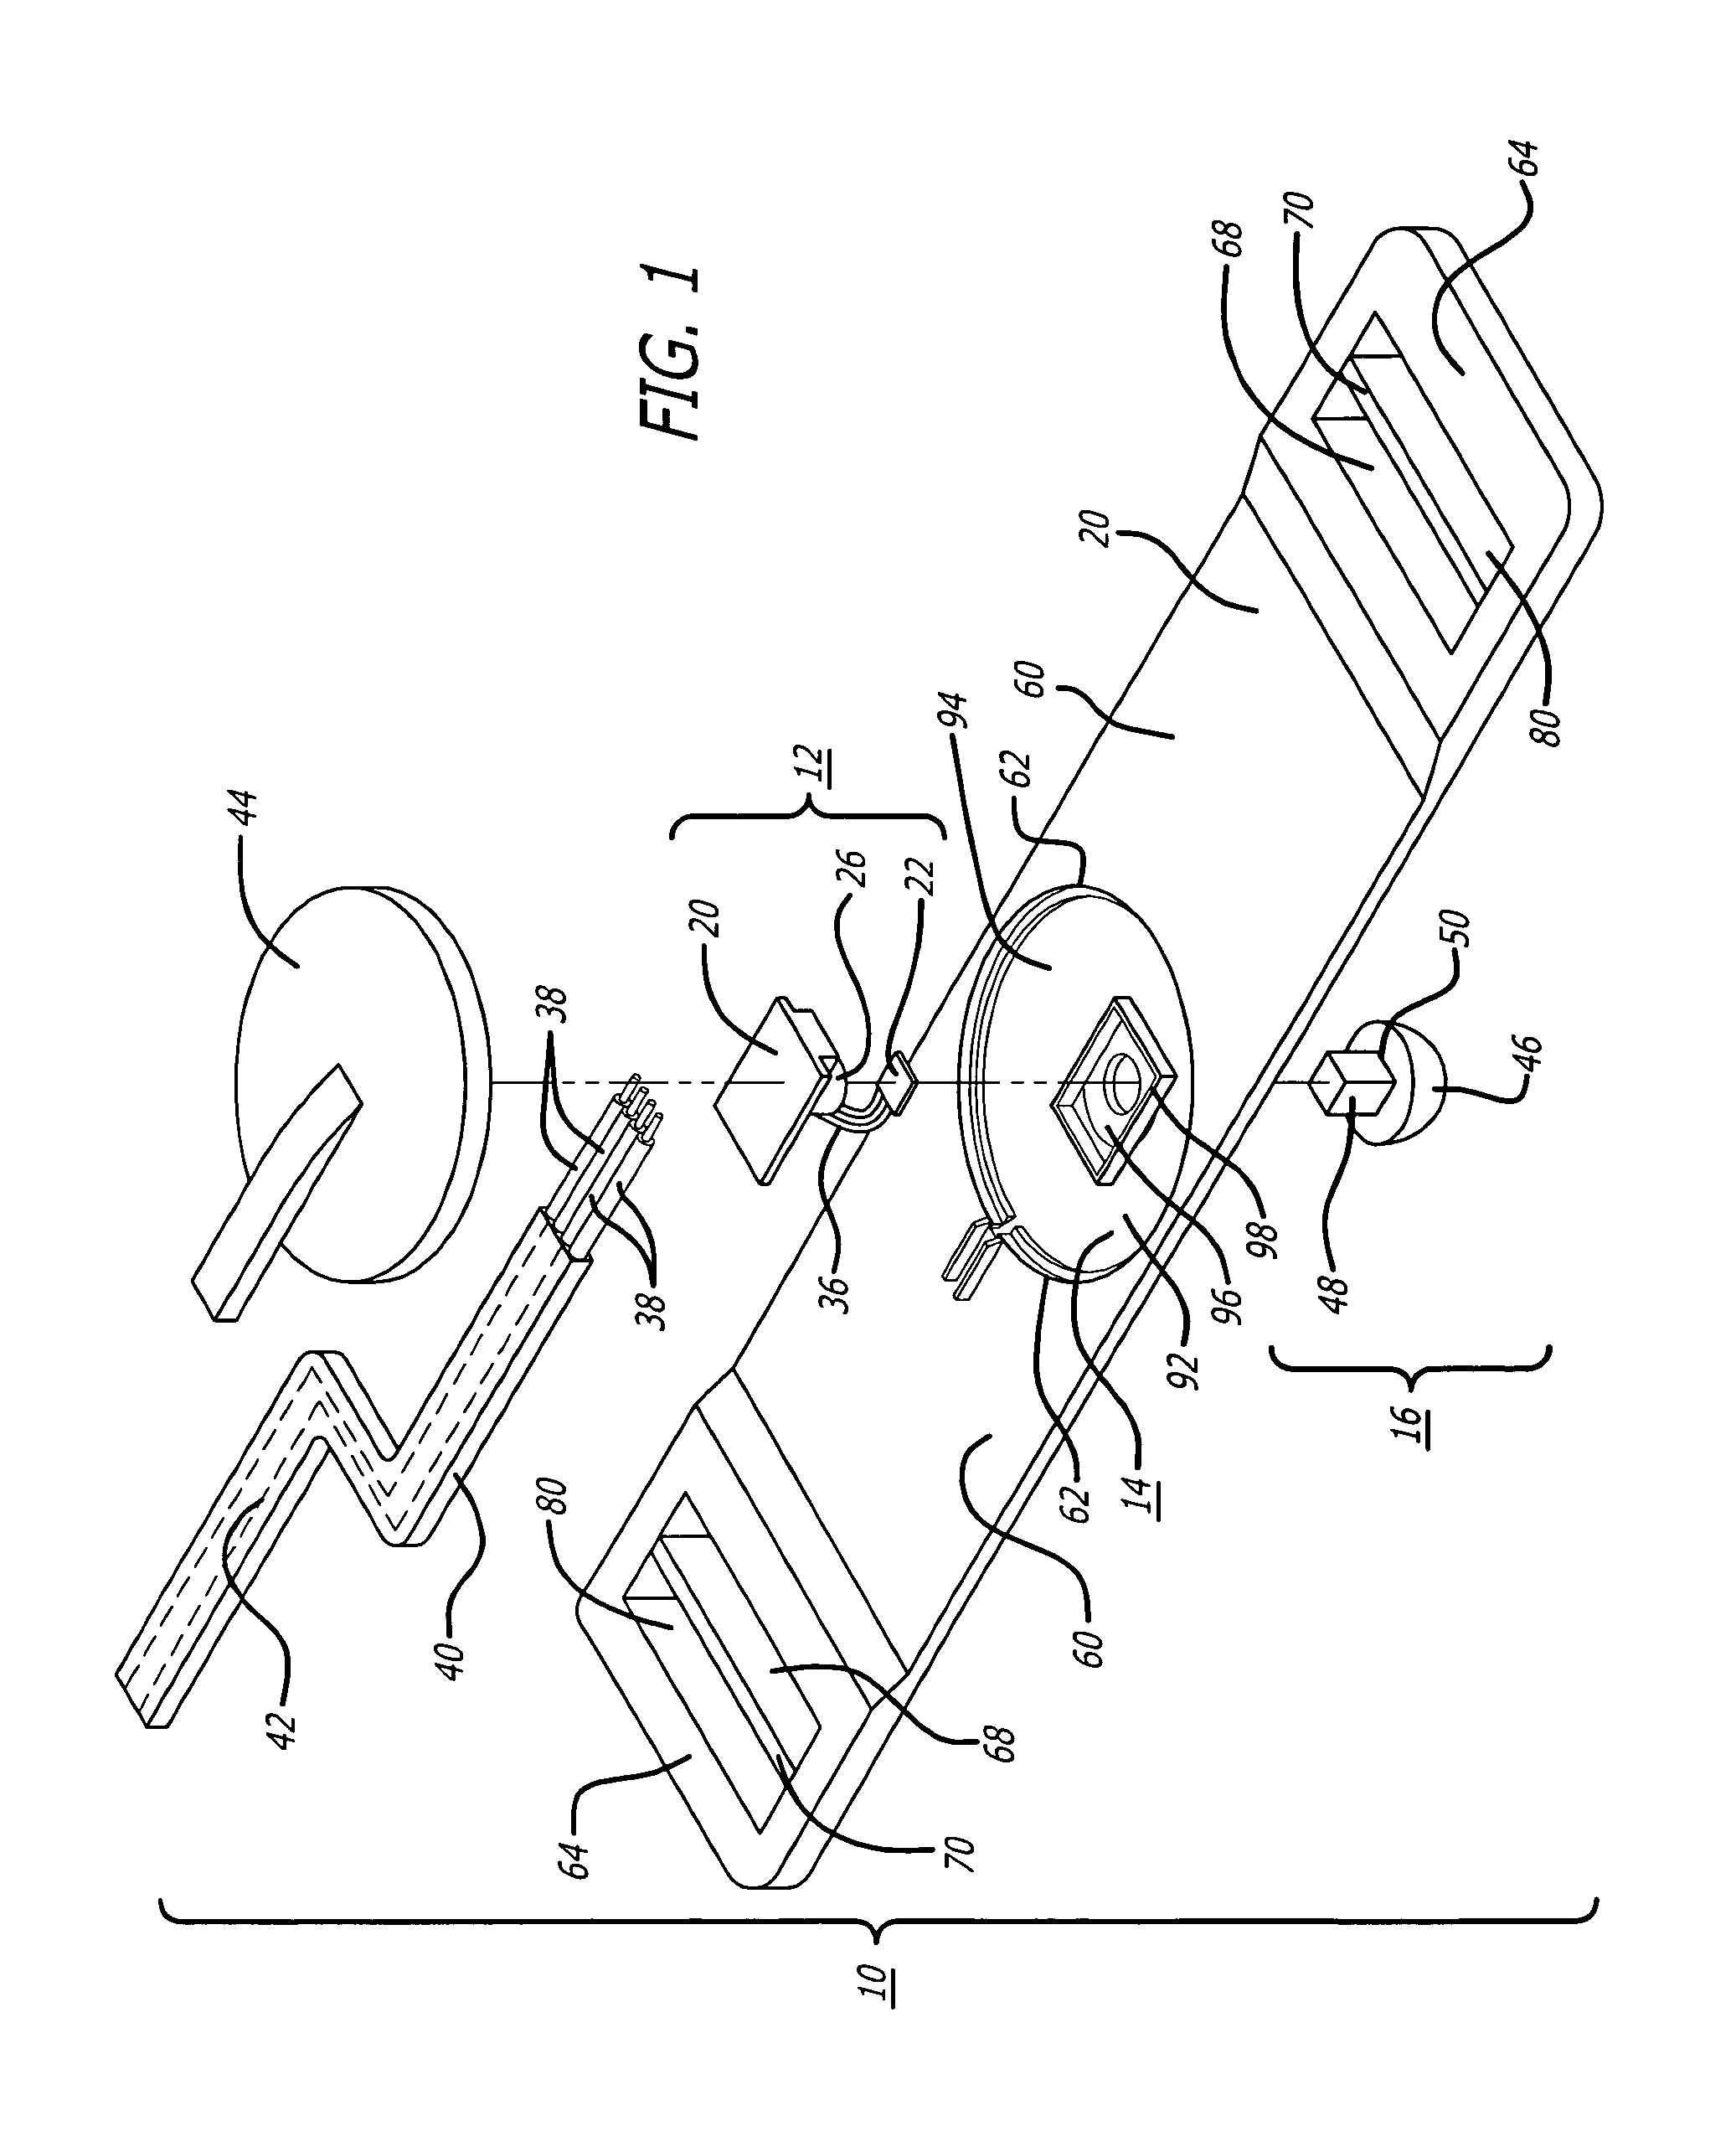 Uterine contraction sensing system and method